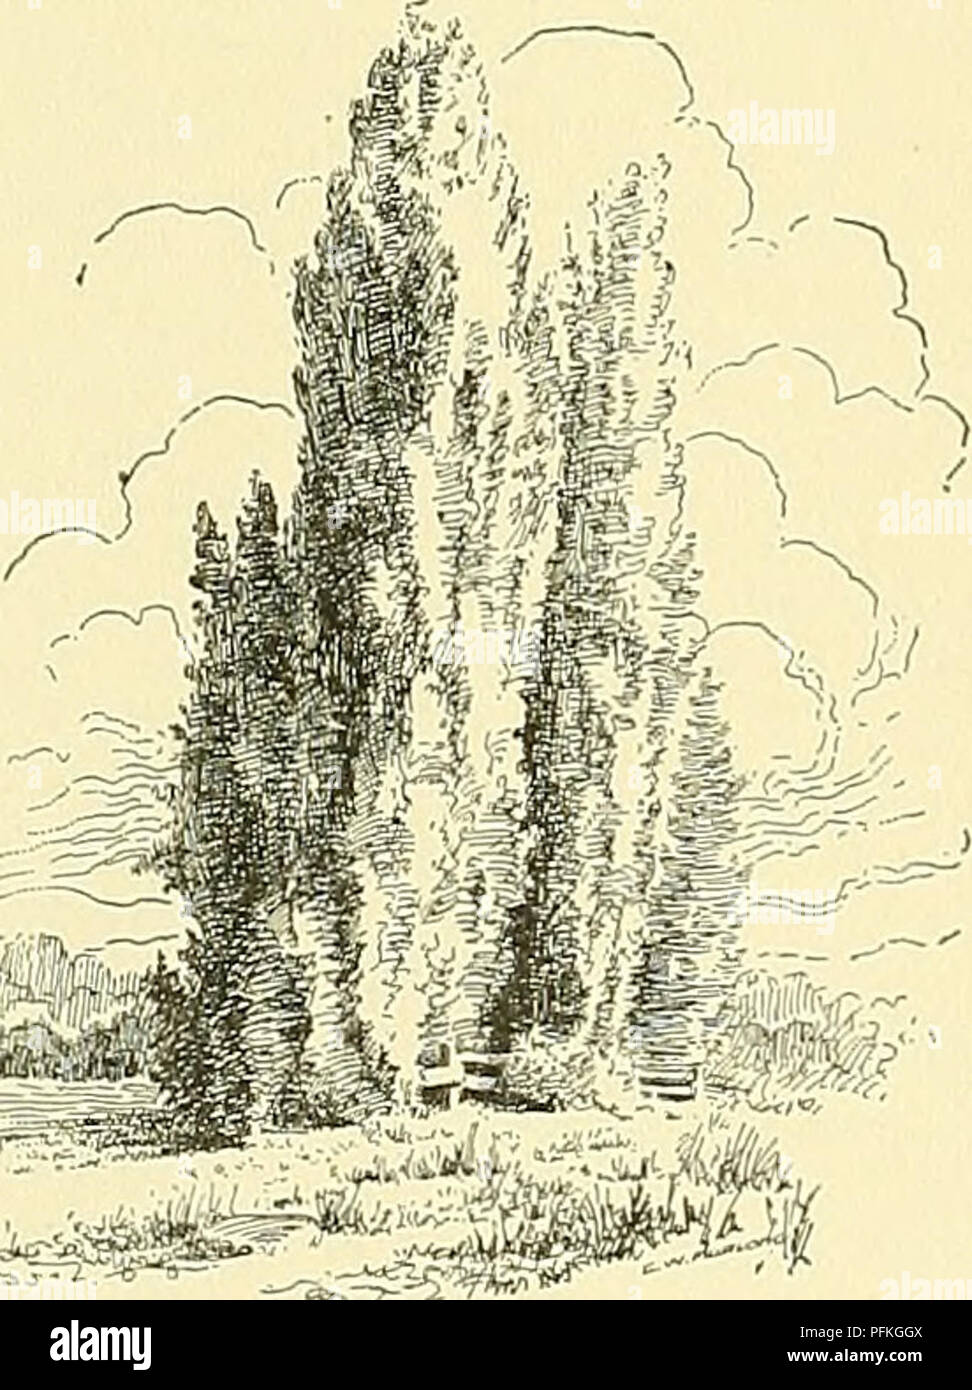 . Cyclopedia of American horticulture, comprising suggestions for cultivation of horticultural plants, descriptions of the species of fruits, vegetables, flowers, and ornamental plants sold in the United States and Canada, together with geographical and biographical sketches. Gardening. 0 int 1906. Staminate catkins of Populus tremuloides (X }-j). P6PITLUS (ancieut Latin name). Poplar. Aspen. From 20 to 25 soft-wooded trees of mostly small or medium size in the northern hemisphere, and which, with Salix, comprise the family Sallcclvetp. The Poplars are dioecious, with both staminate and pistil Stock Photo